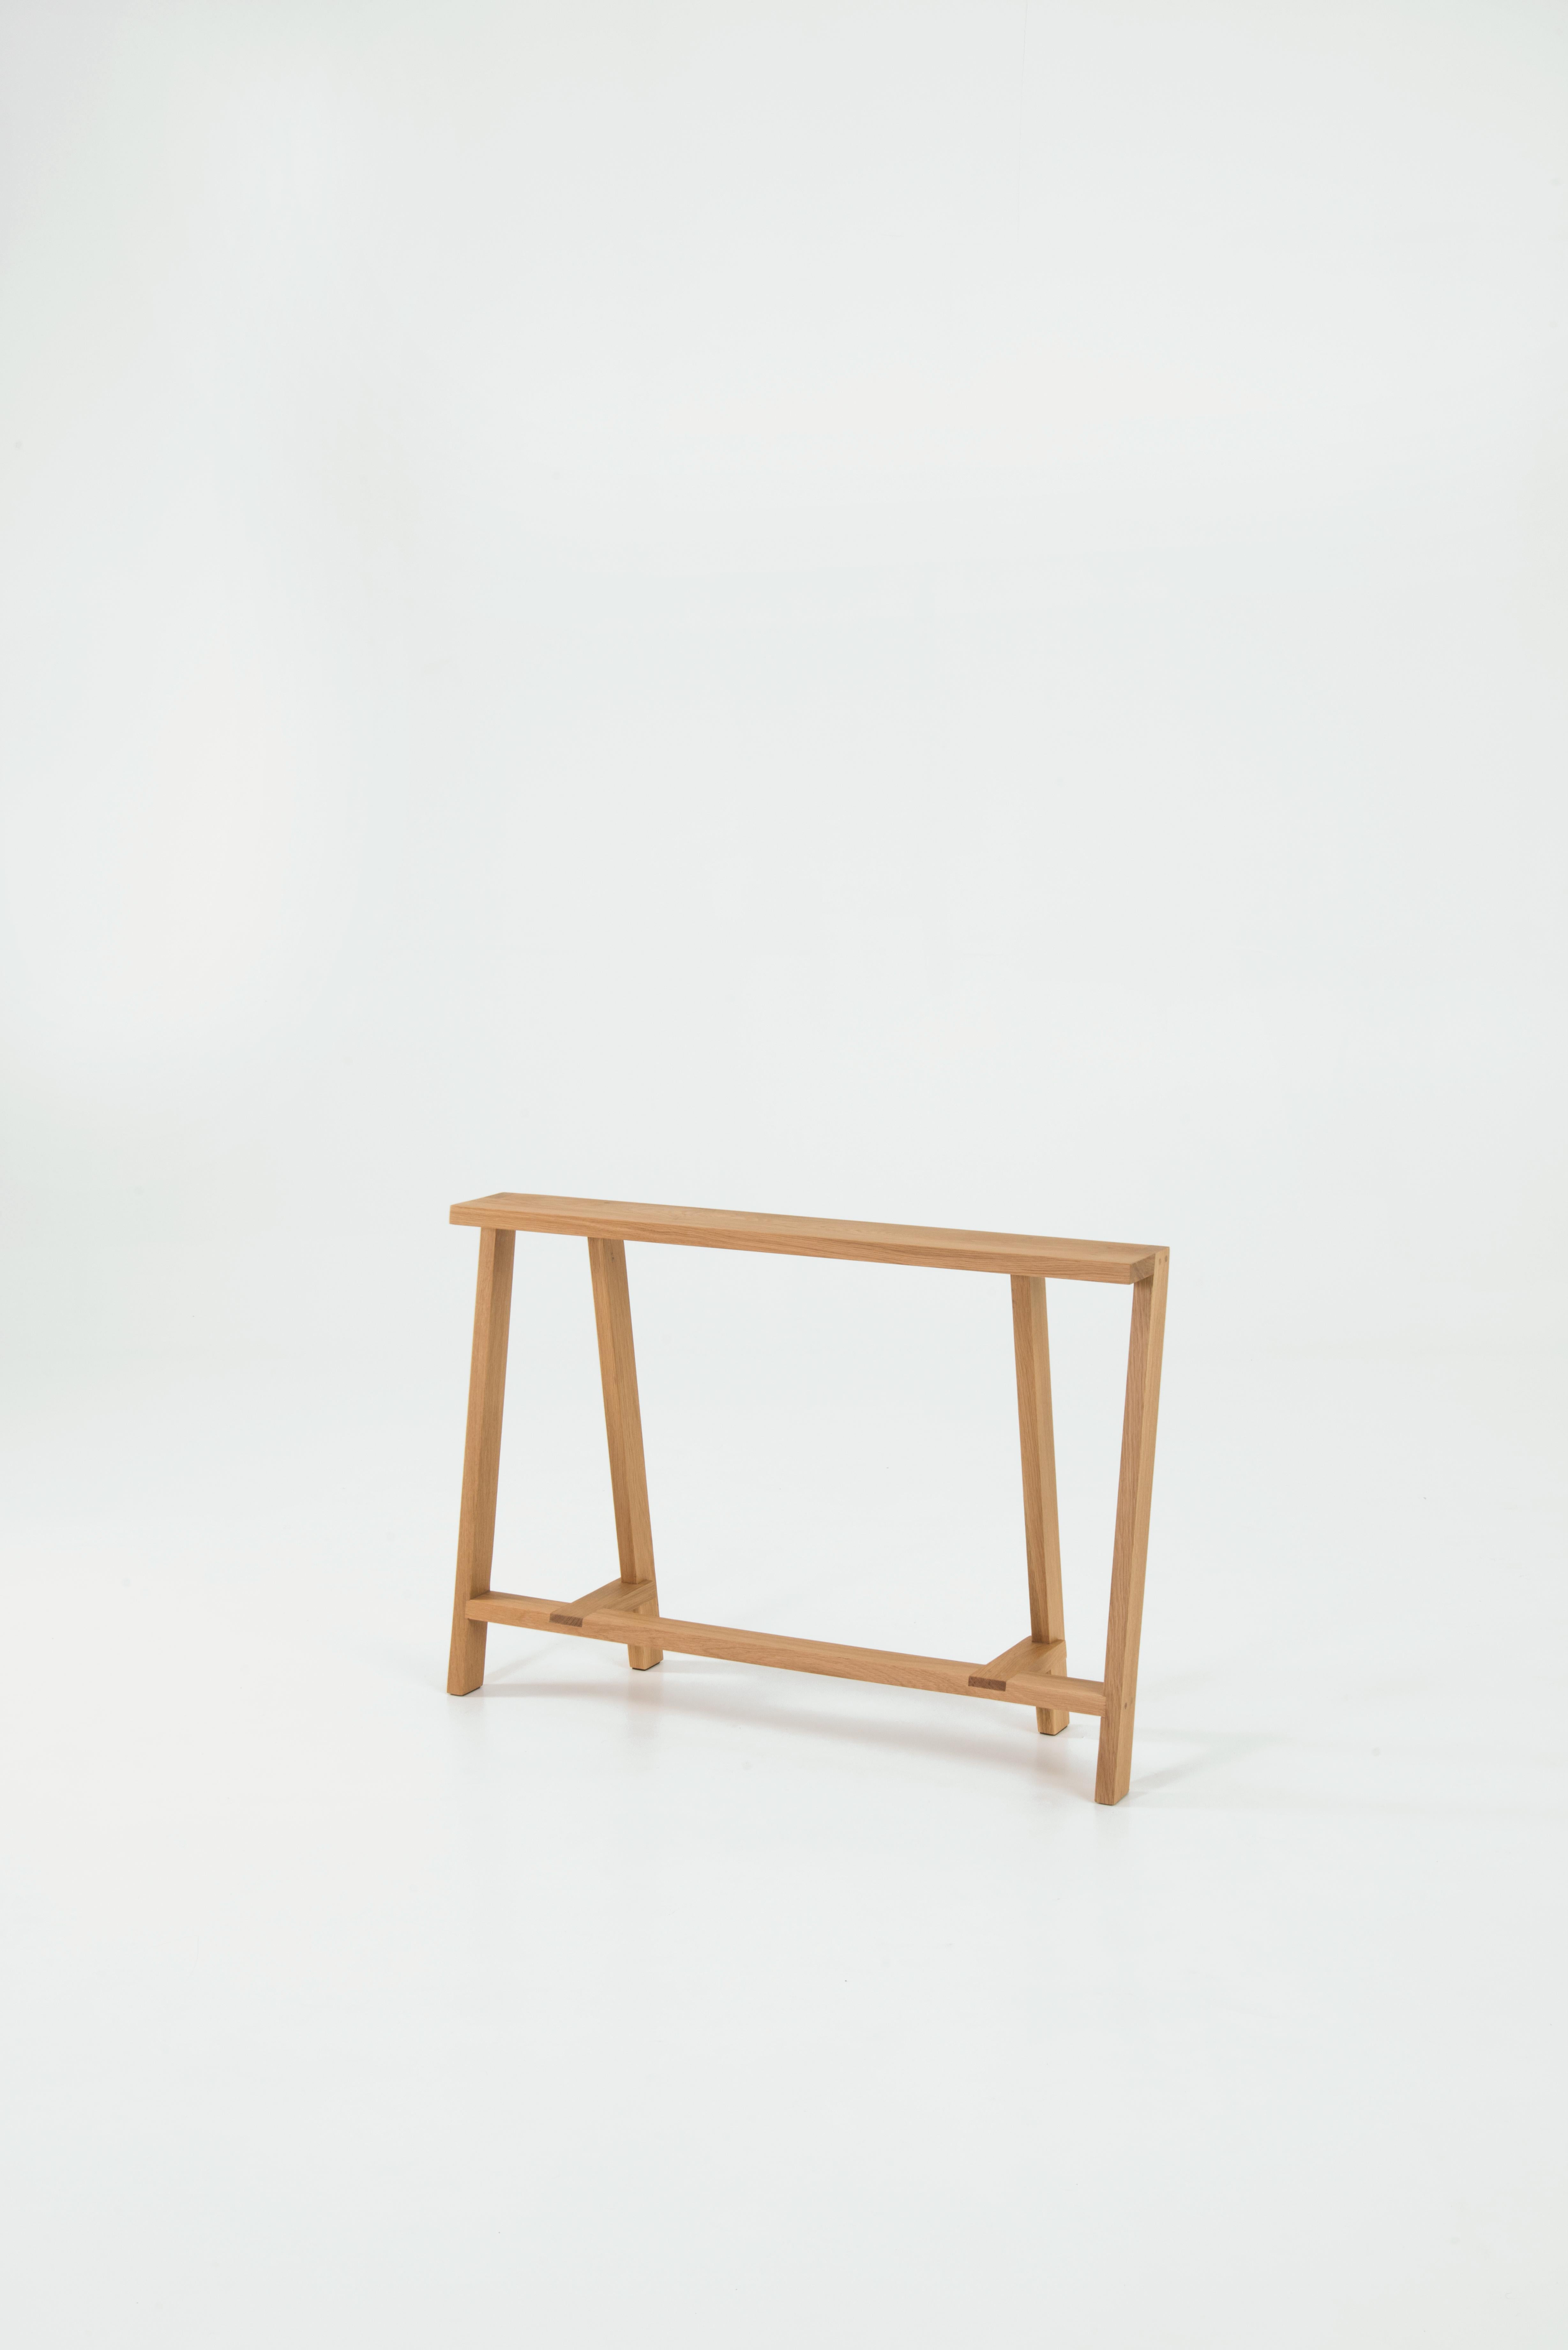 Medium Pausa oak bench by Pierre-Emmanuel Vandeputte
Dimensions: D 27 x W 95 x H 65 cm
Materials: oak wood.
Available in burnt oak version and in 3 sizes.

Pausa is a series of benches; 45cm, 65cm, or 80cm of assembled oak pieces. 
The narrow